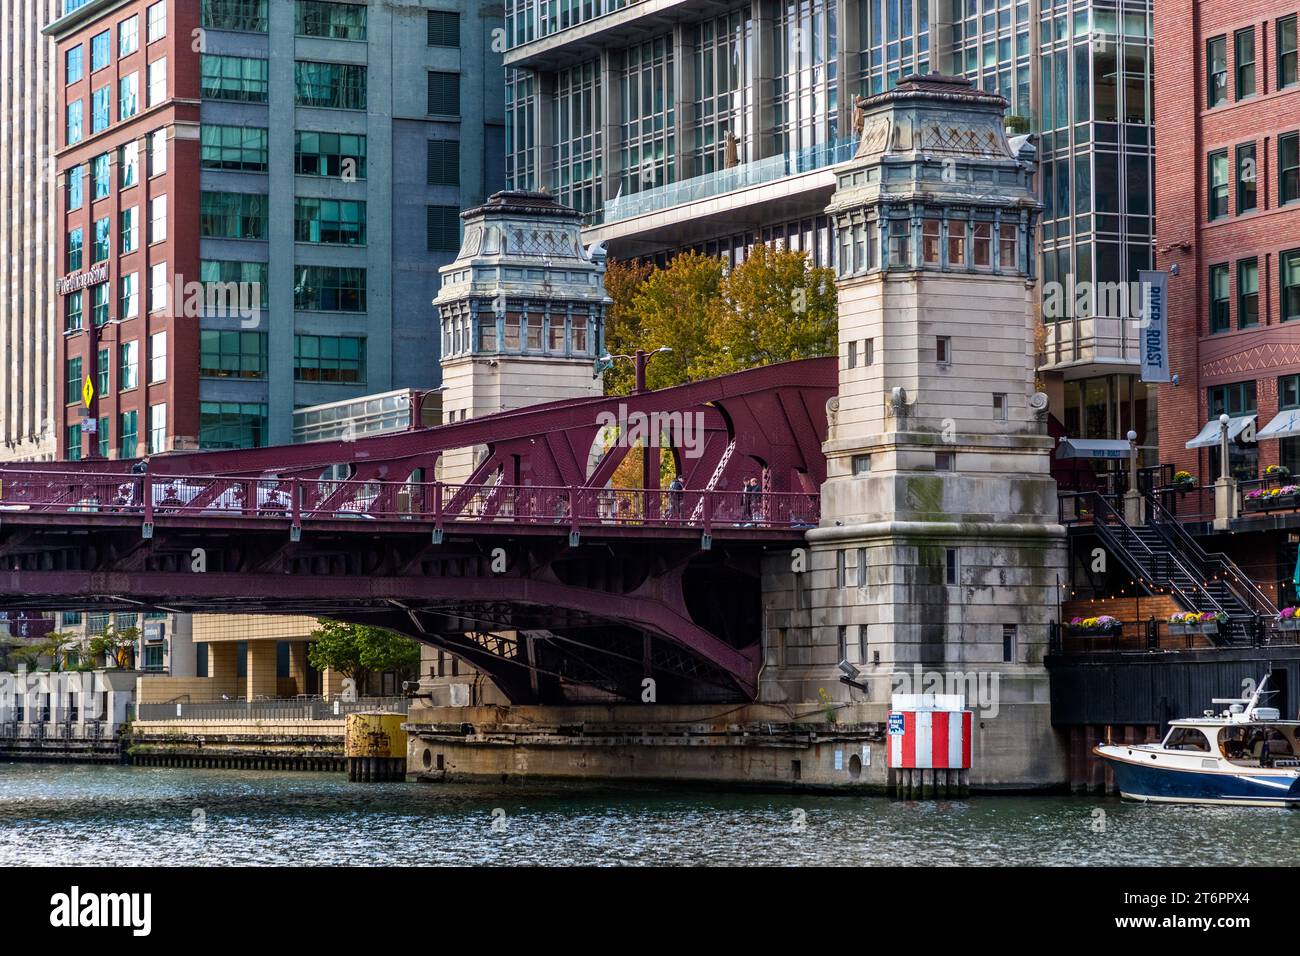 The bridges over the Chicago River are raised when necessary to allow larger ships to pass. The bridge keepers work in the historic bridge houses of Chicago, United States Stock Photo